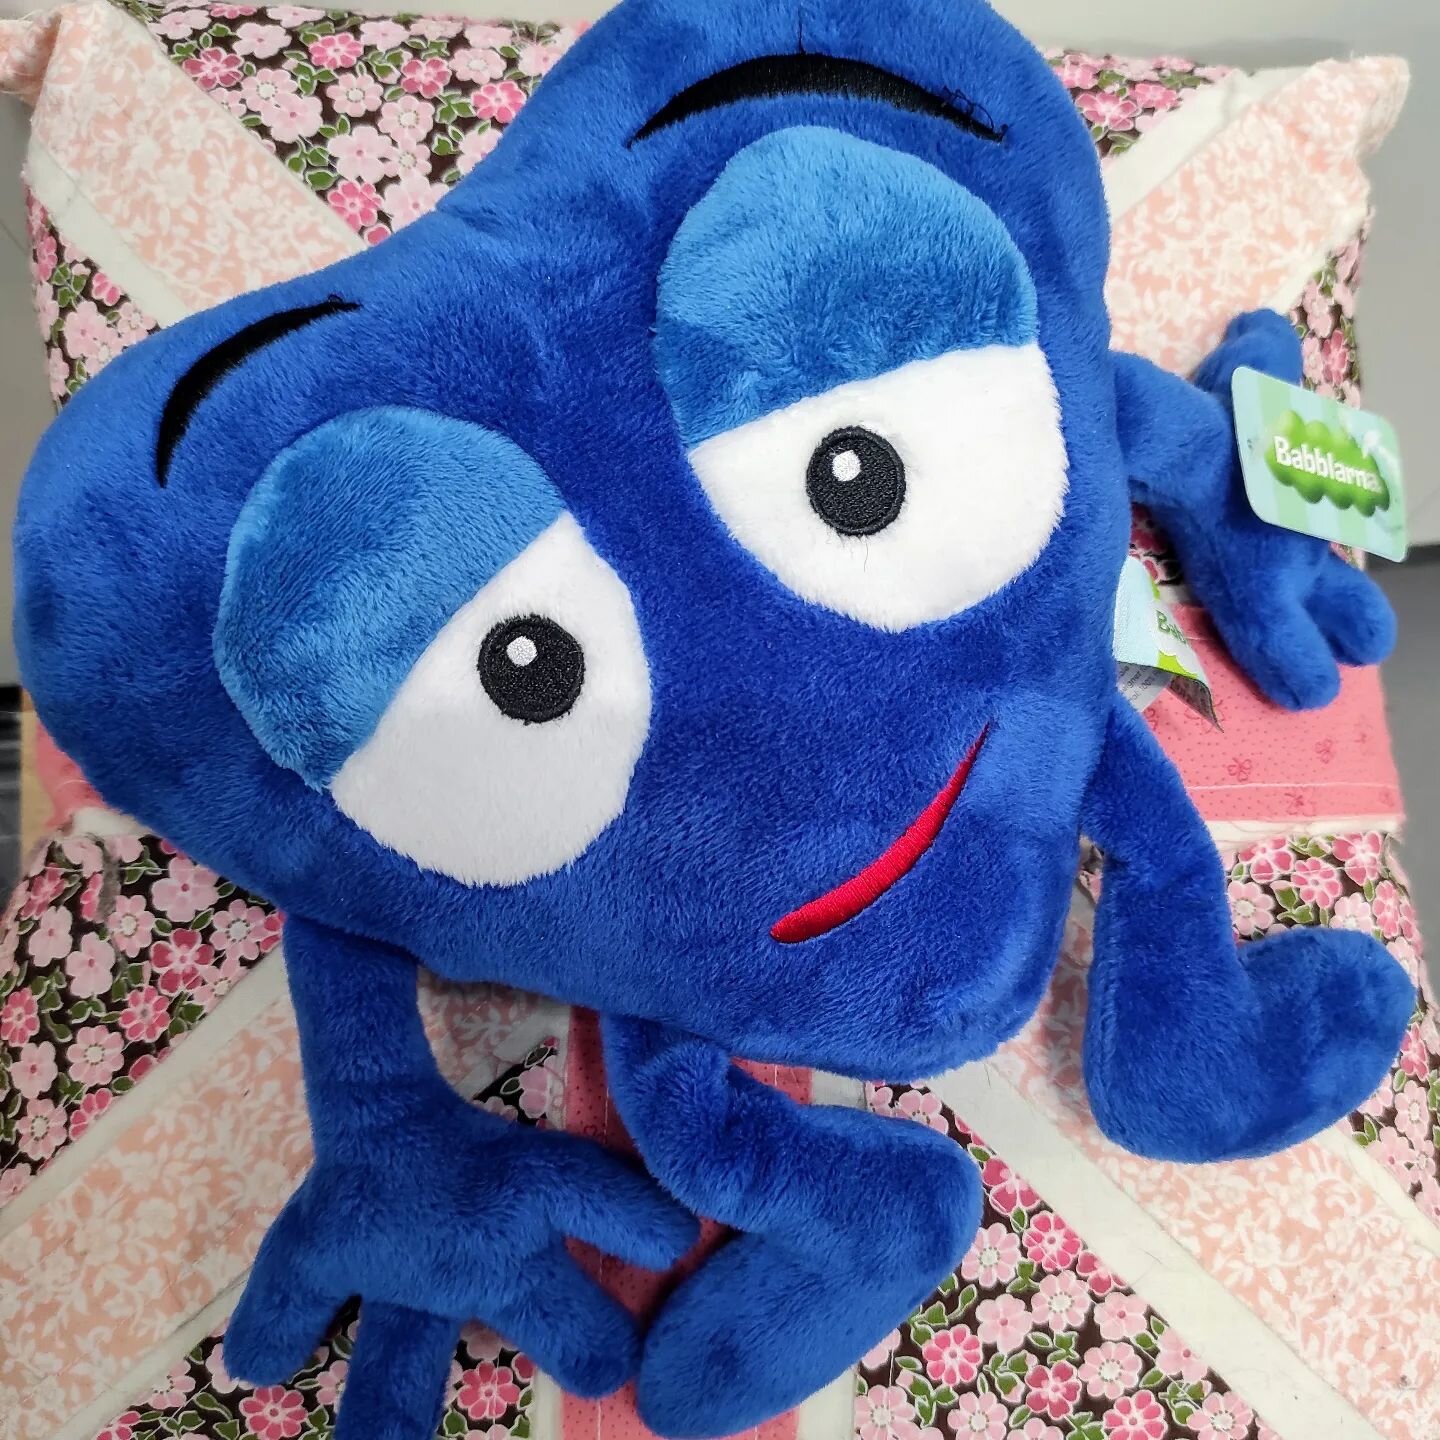 Babblarna soft toy is looking for a new home so are our other equally cute and beautiful goods at the Scrapstore #babblarna #babblarnasofttoys #scrapstoreyoeovil #scrapstorethehub #thehubyeovil #scrapmaterial #scrapfabricproject #scrapcraft #eastergi